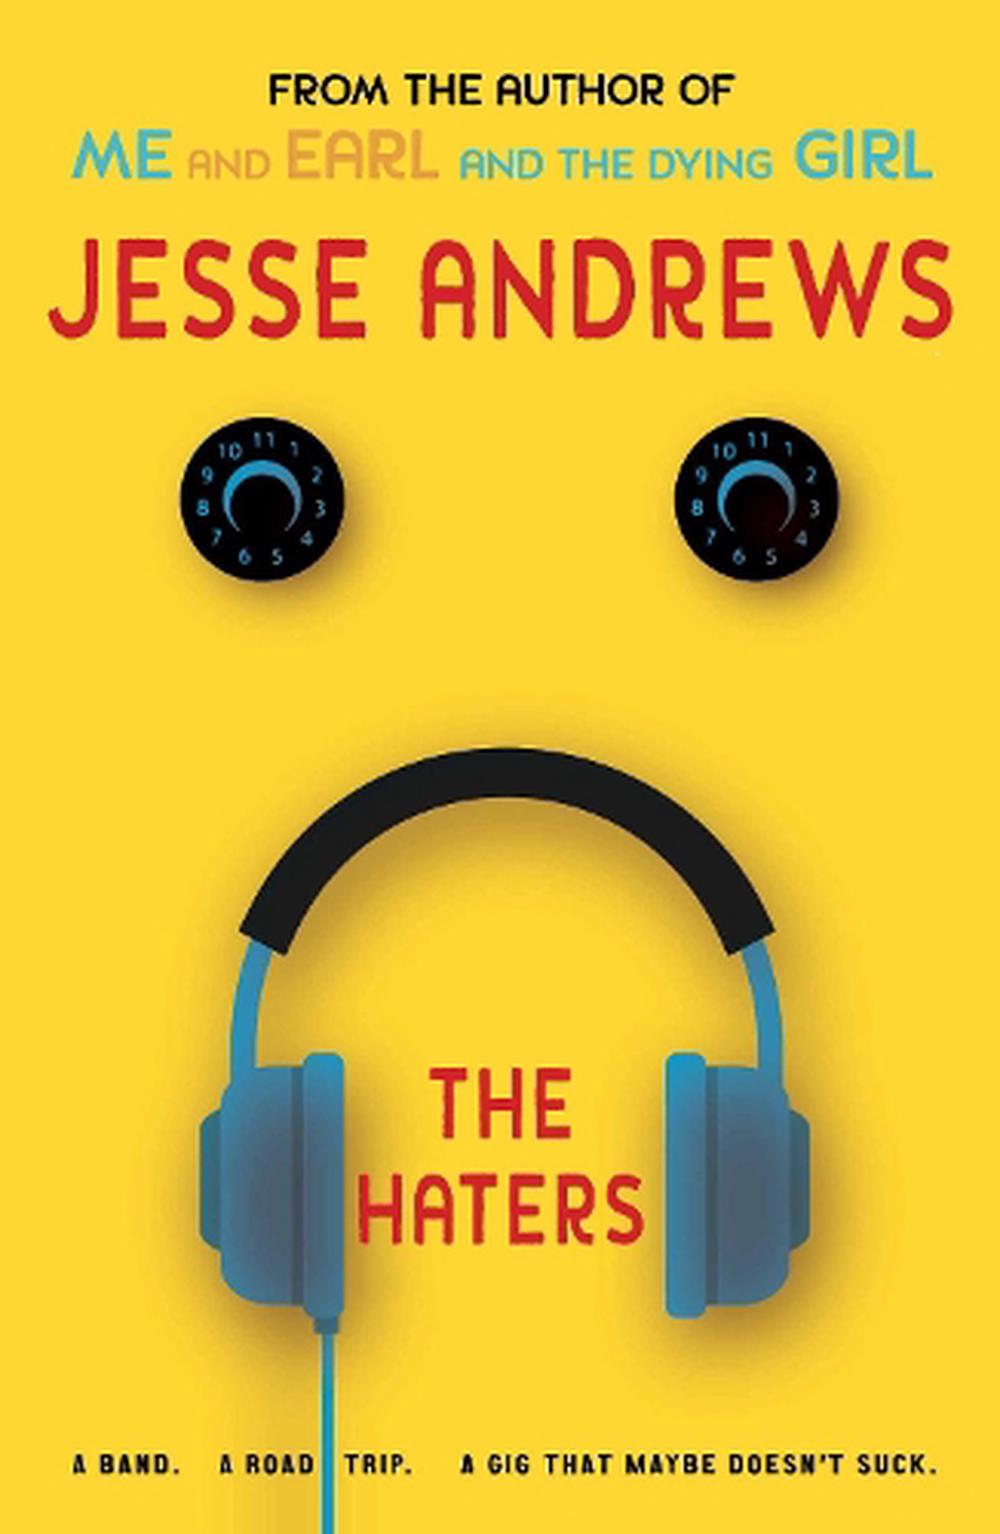 the haters by jesse andrews